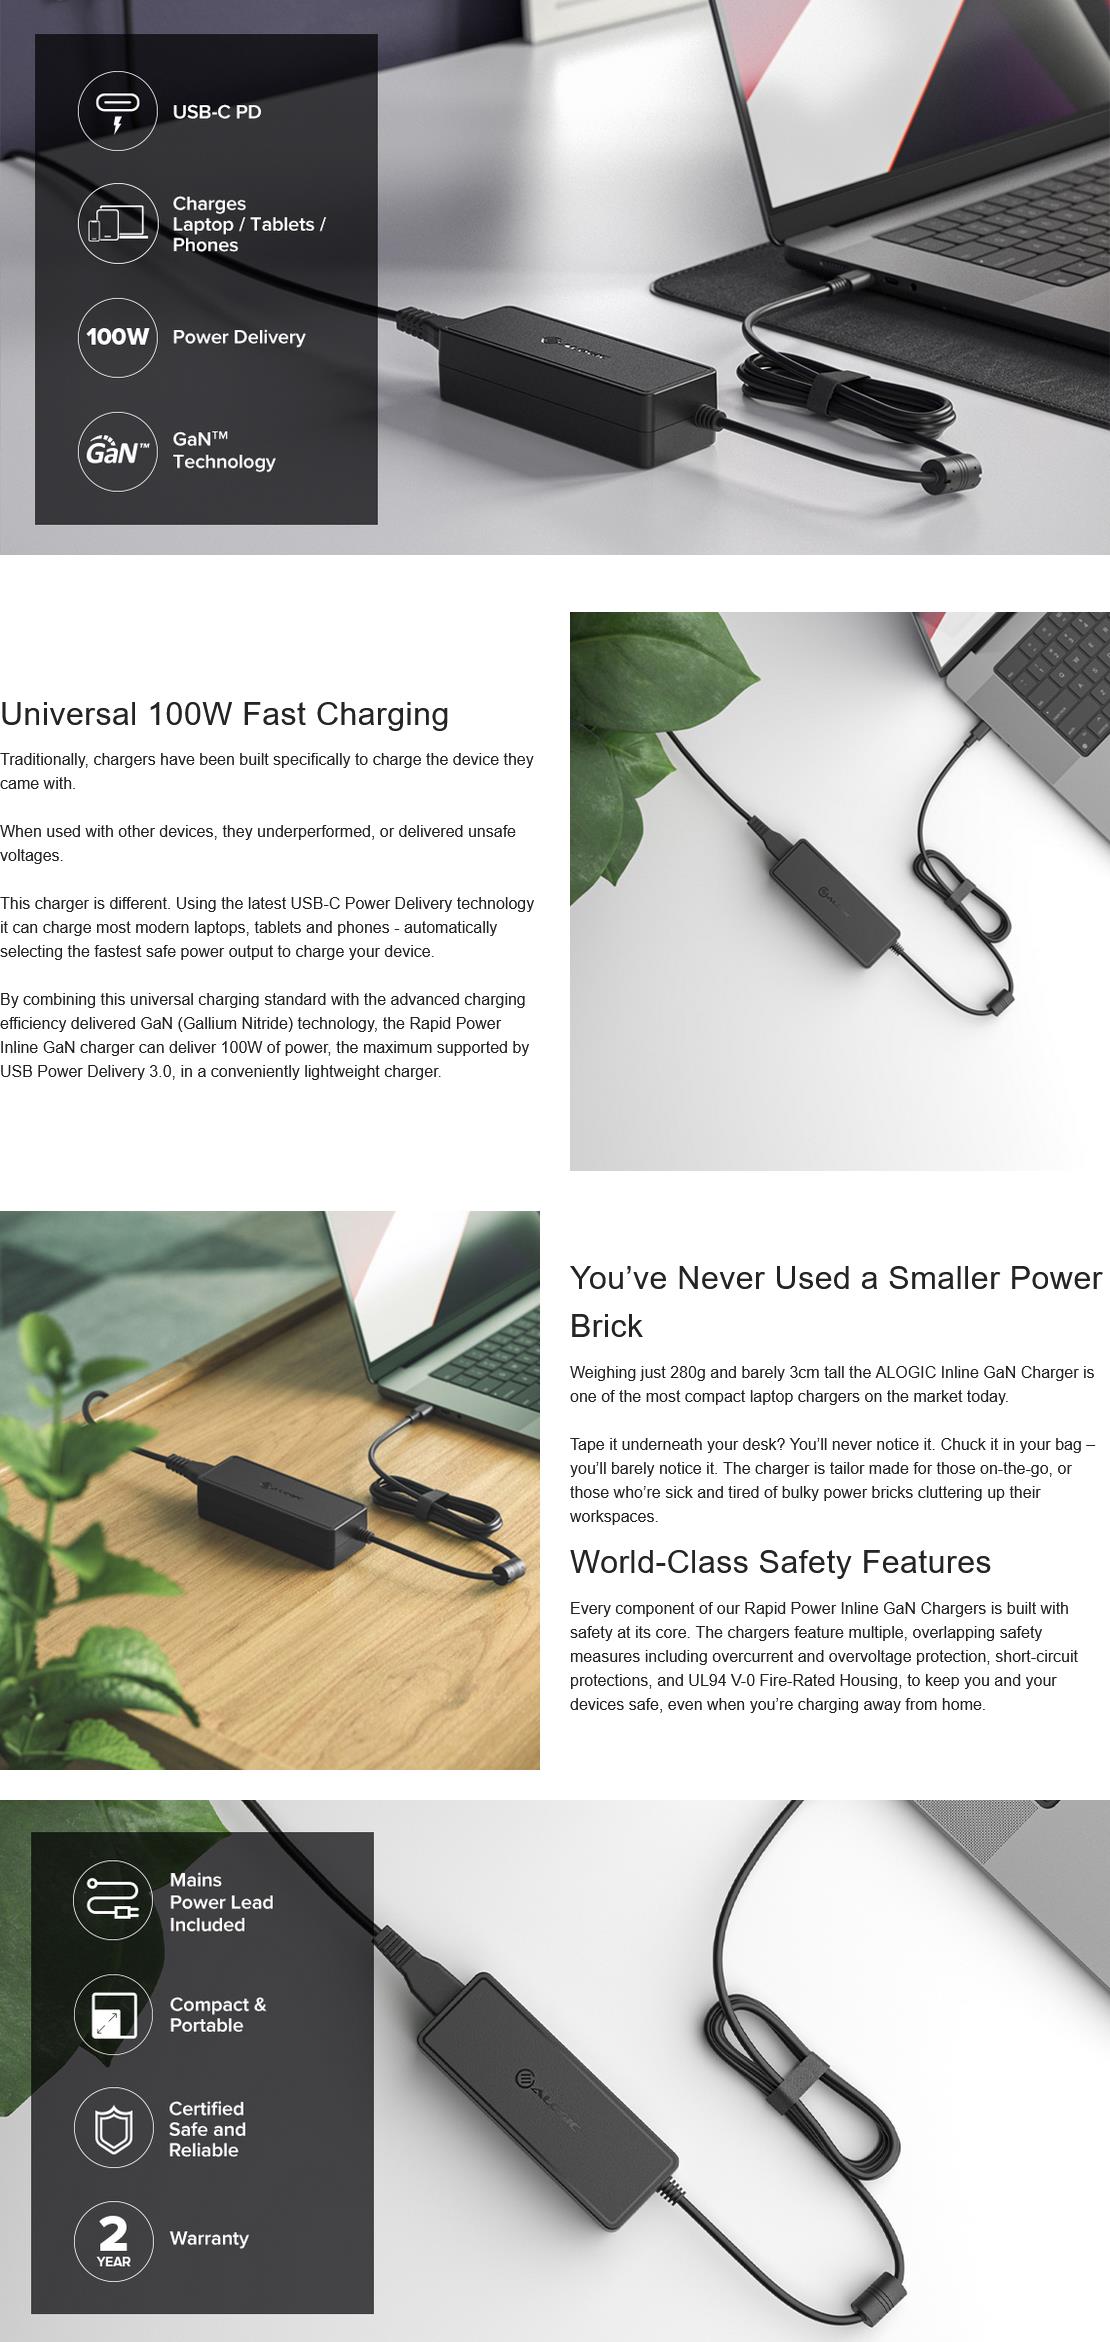 A large marketing image providing additional information about the product ALOGIC Rapid Power 100W Inline USB-C GaN Charger - Additional alt info not provided